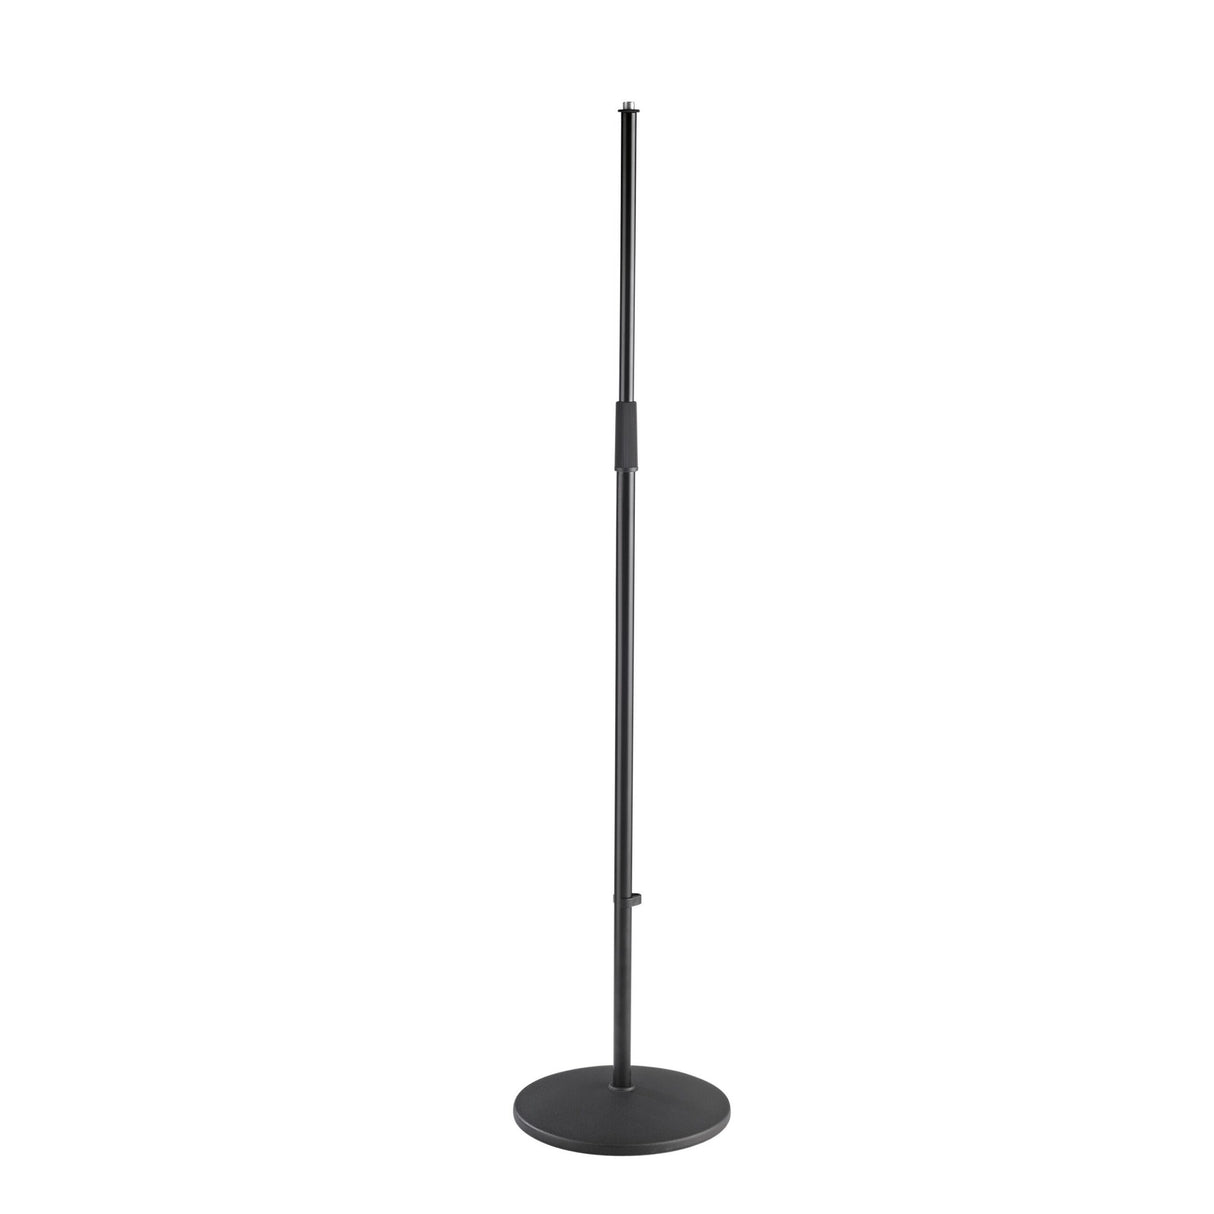 K&M 26140 Microphone Stand with Anti-Vibration Rubber Ring, Black